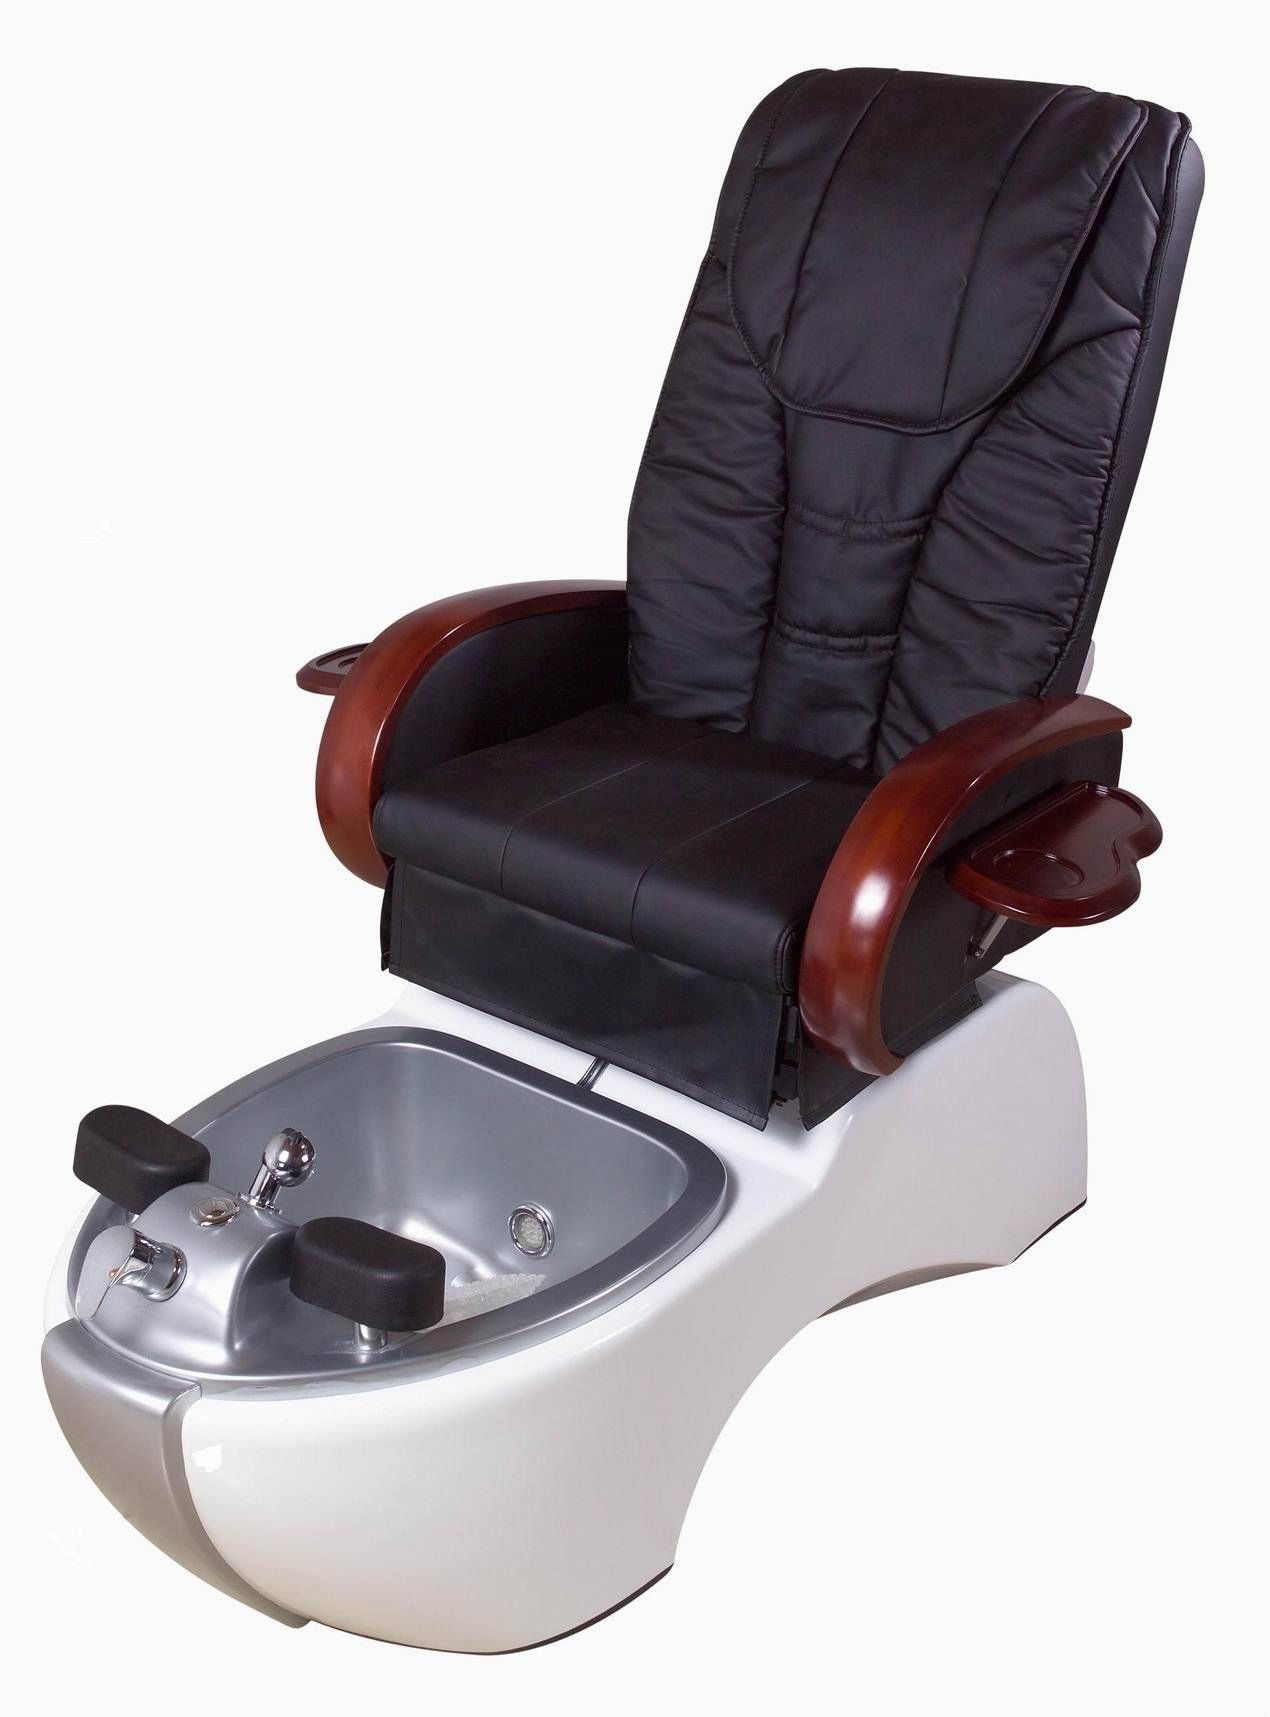 Great Spa Massage Chairs | Cochabamba With Sofa Pedicure Chairs (View 15 of 15)